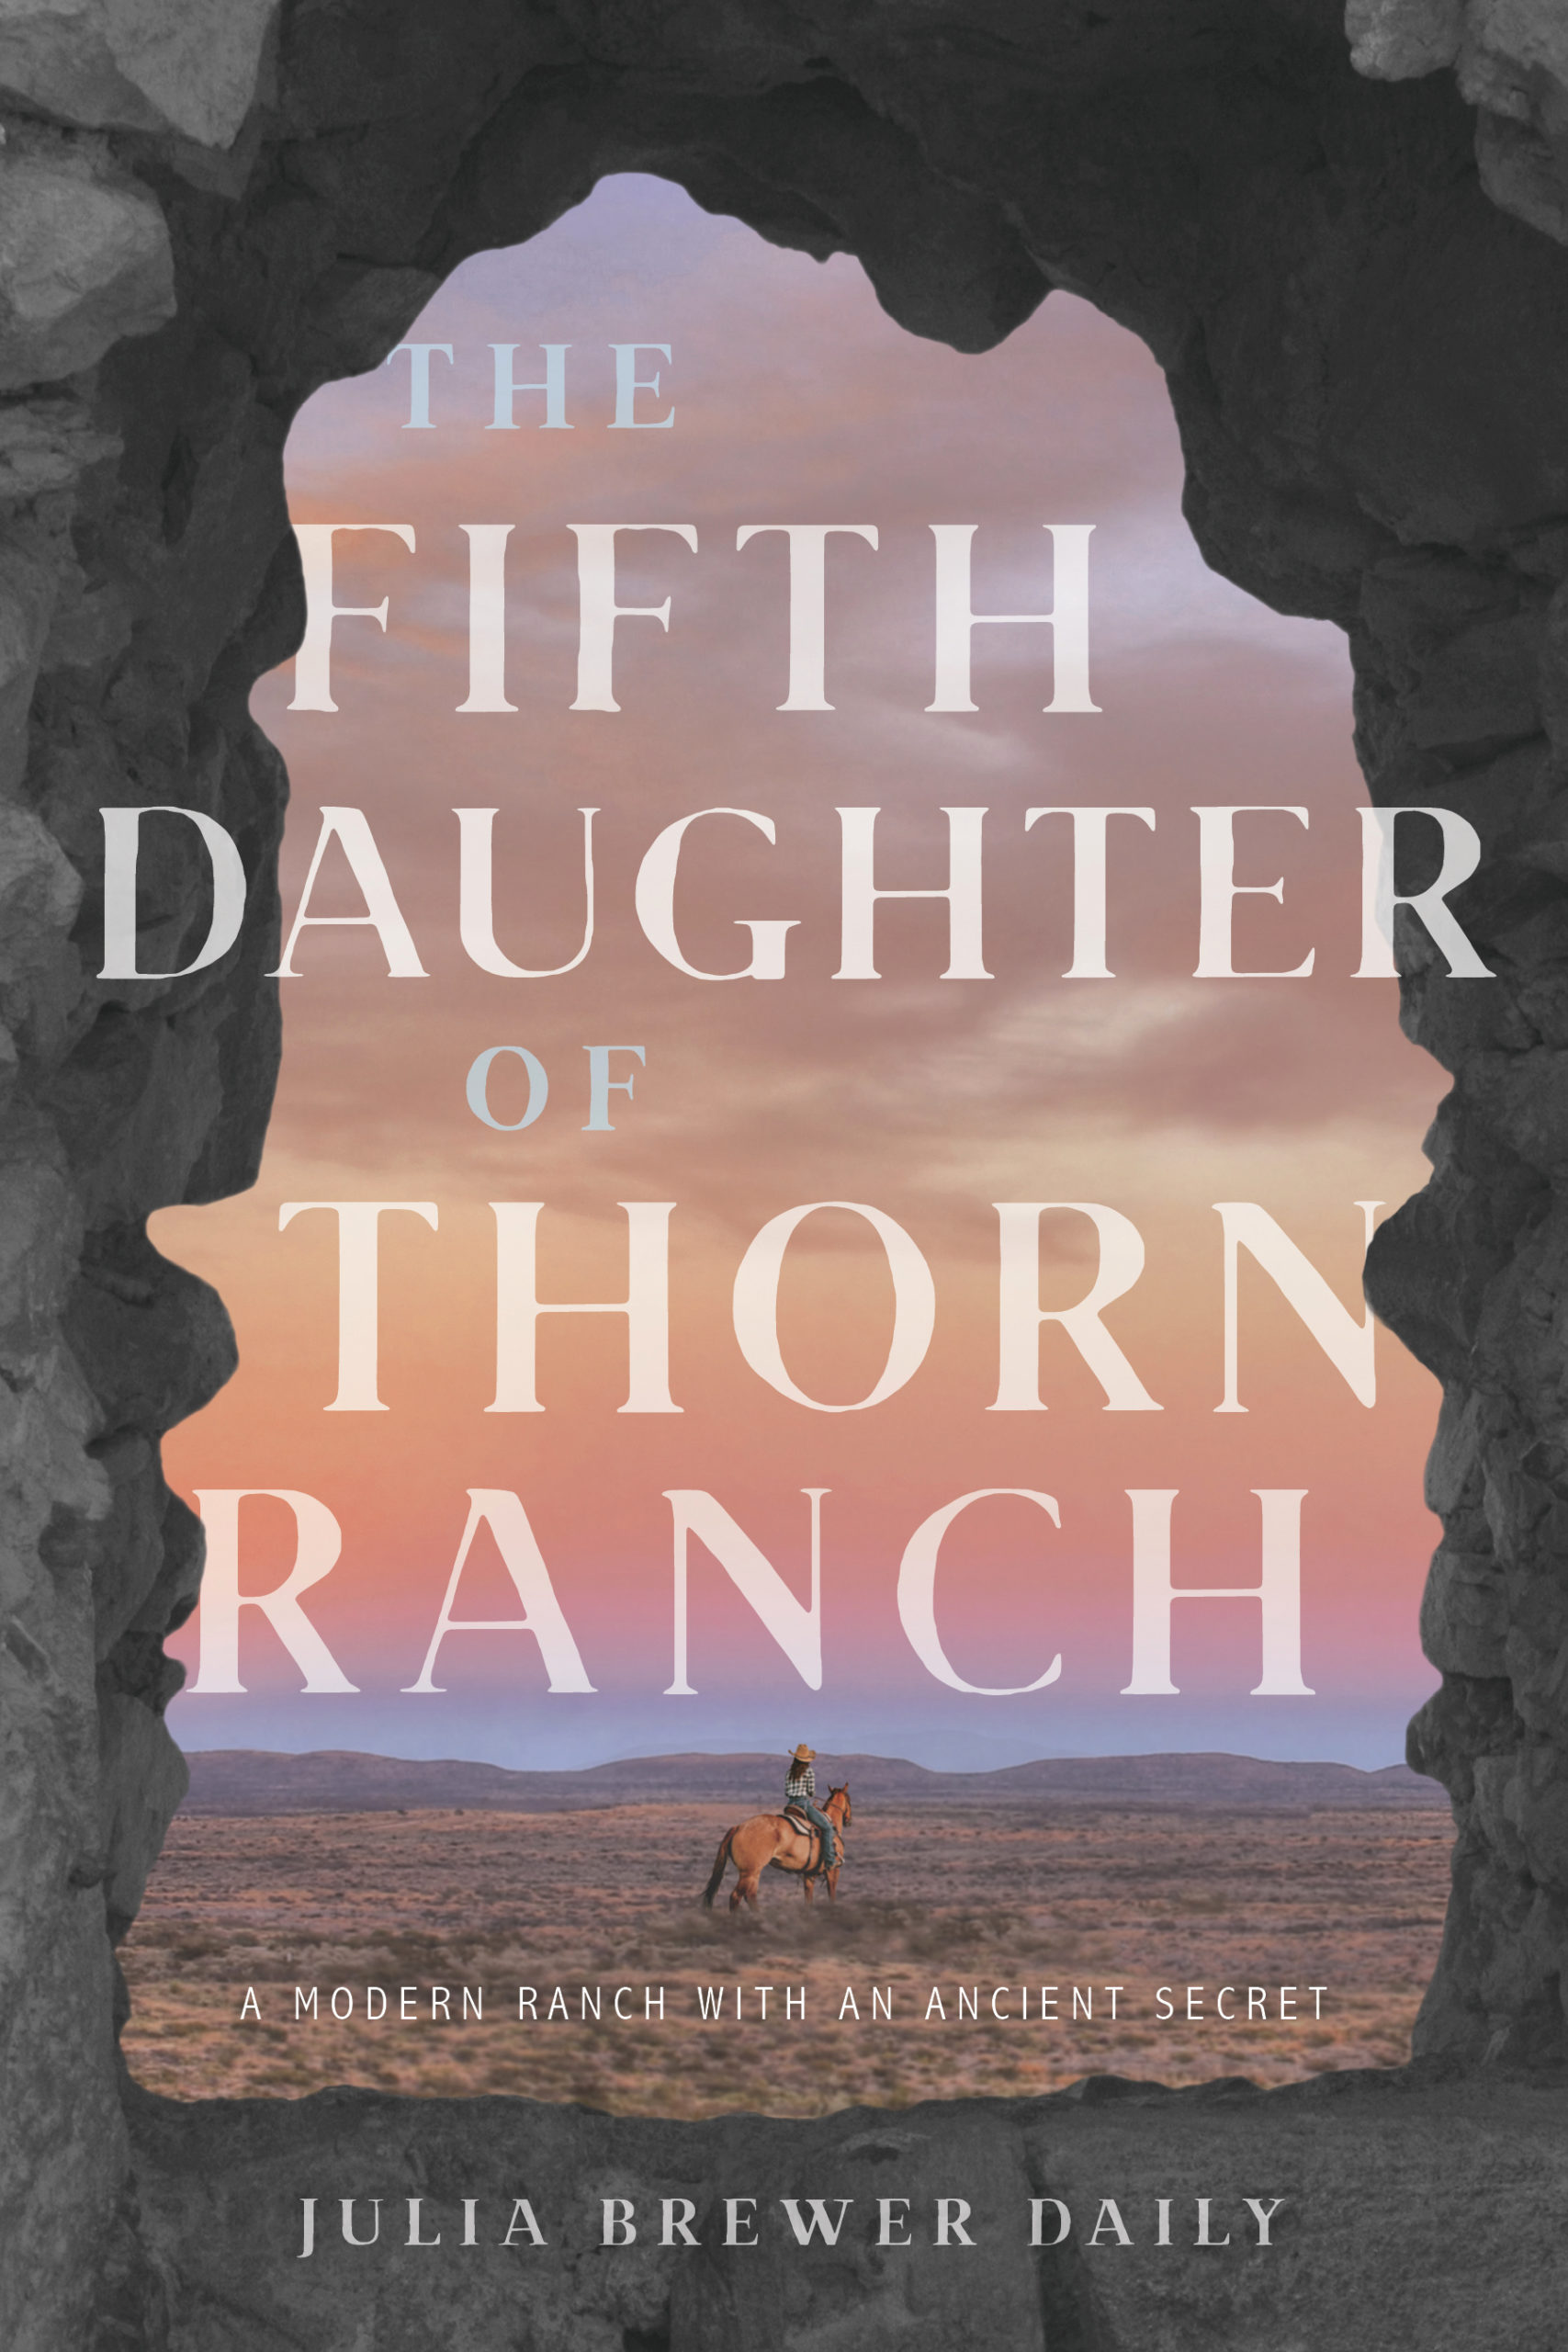 The Fifth Daughter of Thorn Ranch by Julia Brewer Daily